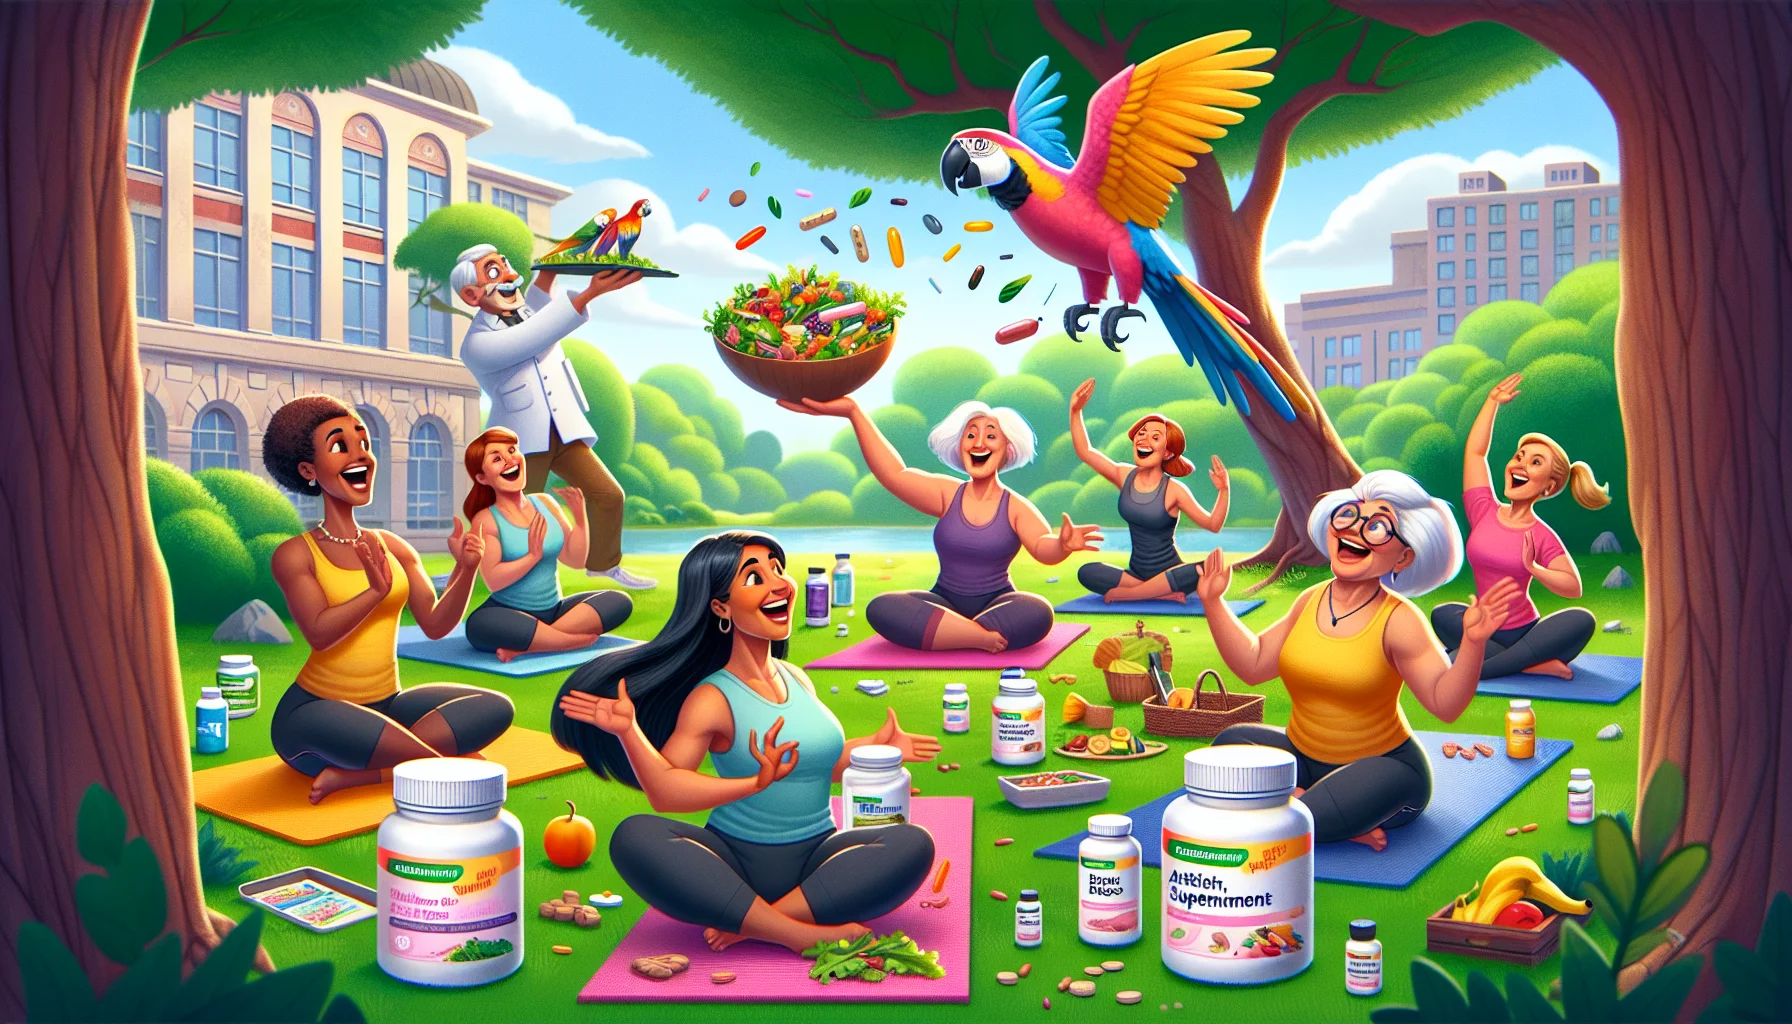 Imagine a whimsical yet realistic scenario set in a vibrant park. A group of active Caucasian, Black, Hispanic, South Asian, and Middle-Eastern women in their 50s are joyfully participating in an outdoor yoga session. On their yoga mats, there are various bottles of supplements labeled 'Best for Women Over 50'. In the background, an enthusiastic nutritionist is making a large salad nearby, gesturing with excitement about the benefits of leafy greens and fresh fruits. A pet parrot on a tree branch overhead mimics the nutritionist's words with a comedic flair, causing everyone to burst into laughter.